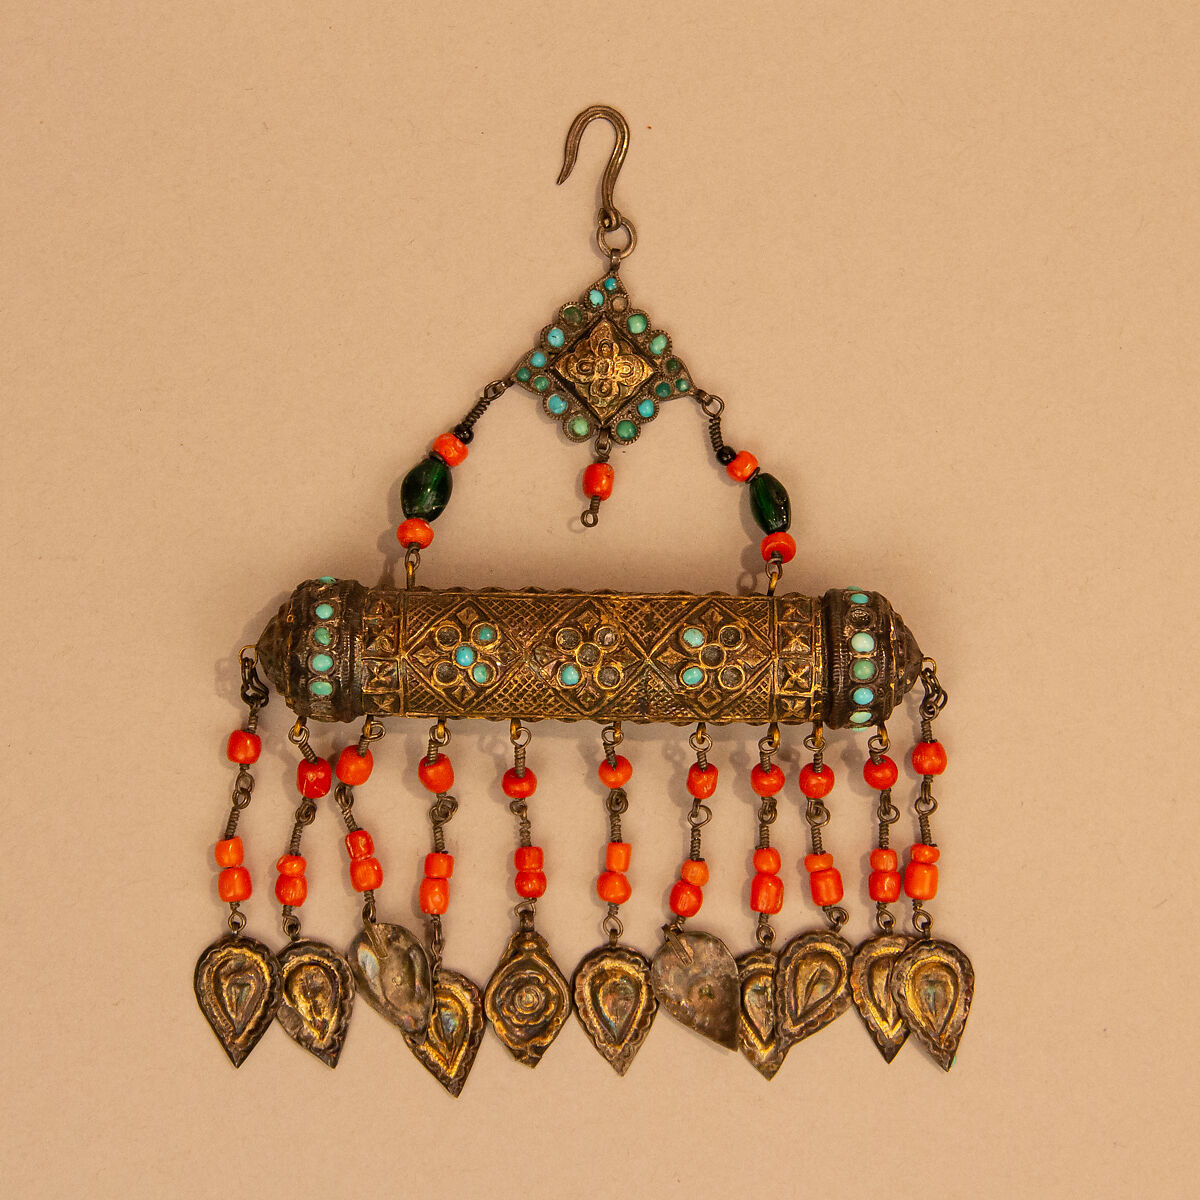 Amulet Case, One of a Pair, Silver, coral, turquoise, glass 